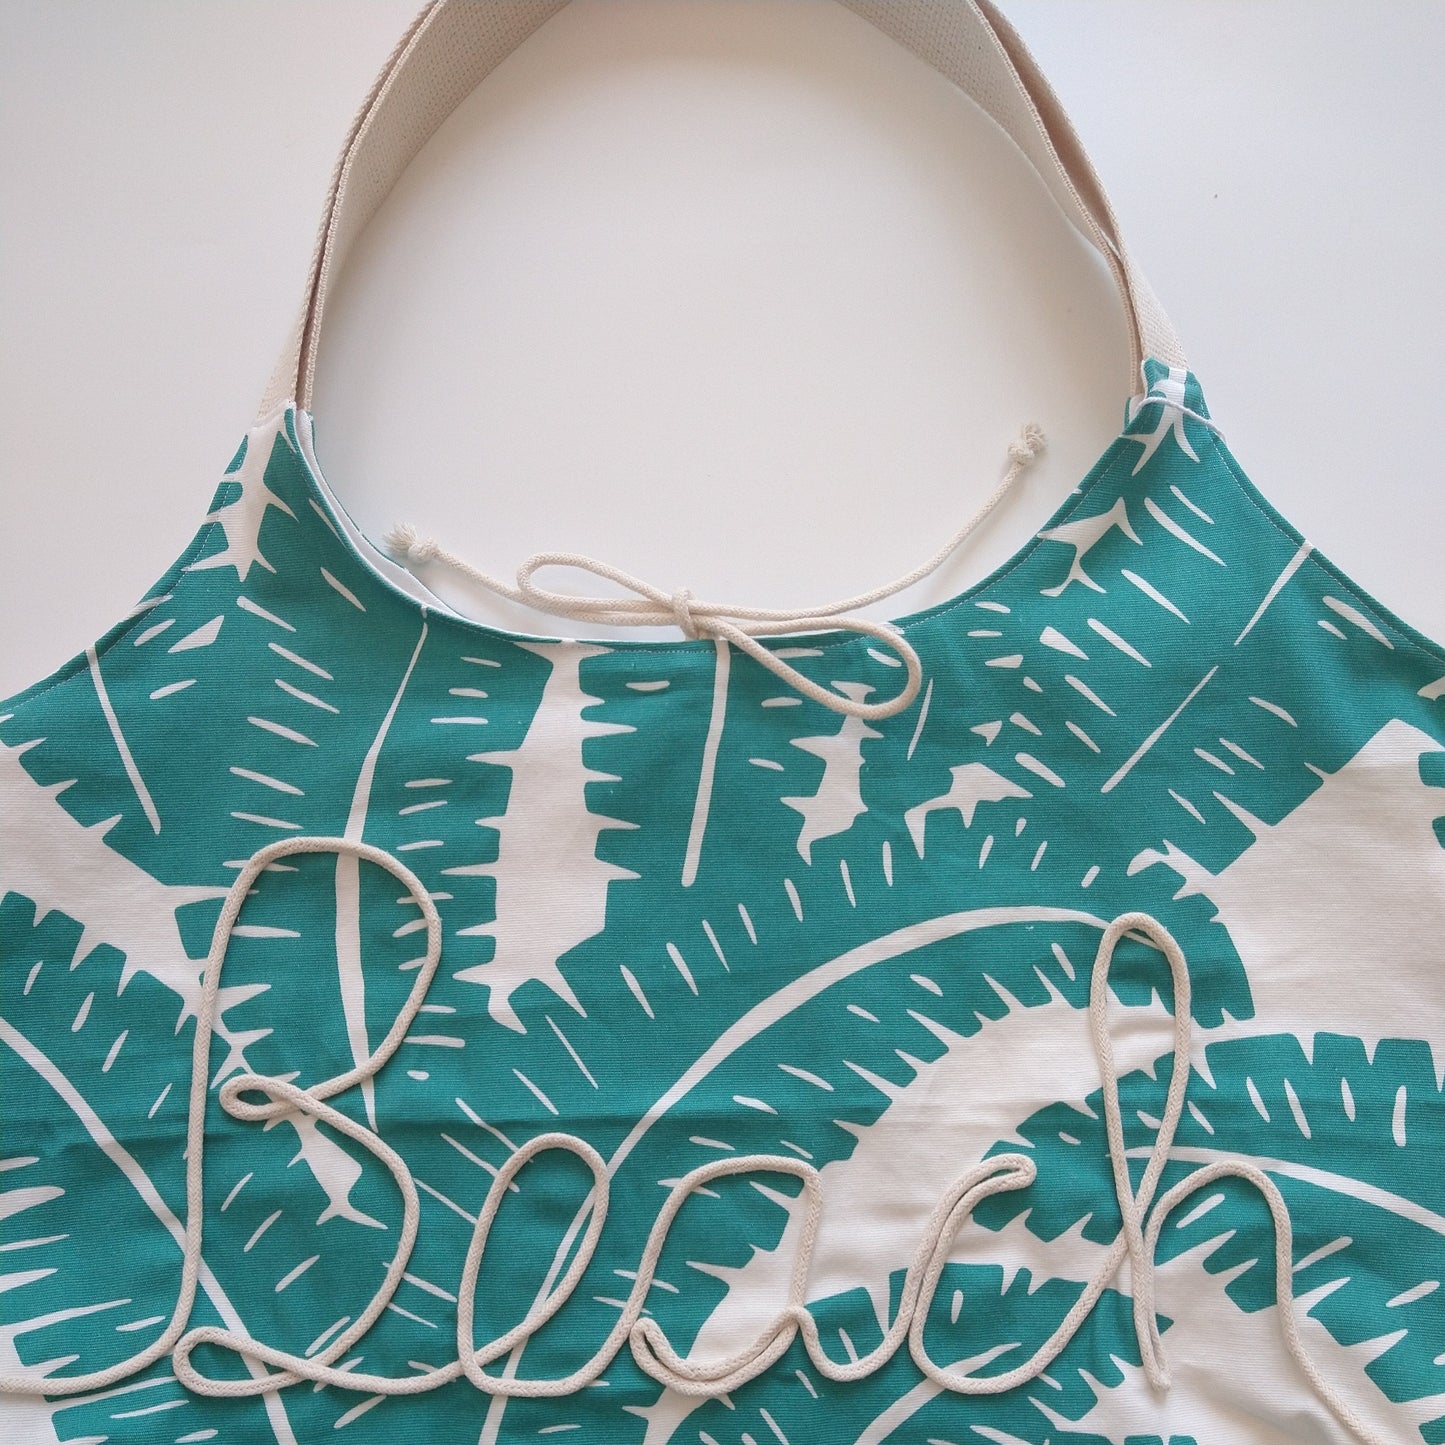 Shopping/beach bag, reversible, size large, turquoise beach palms (Handmade in Canada)